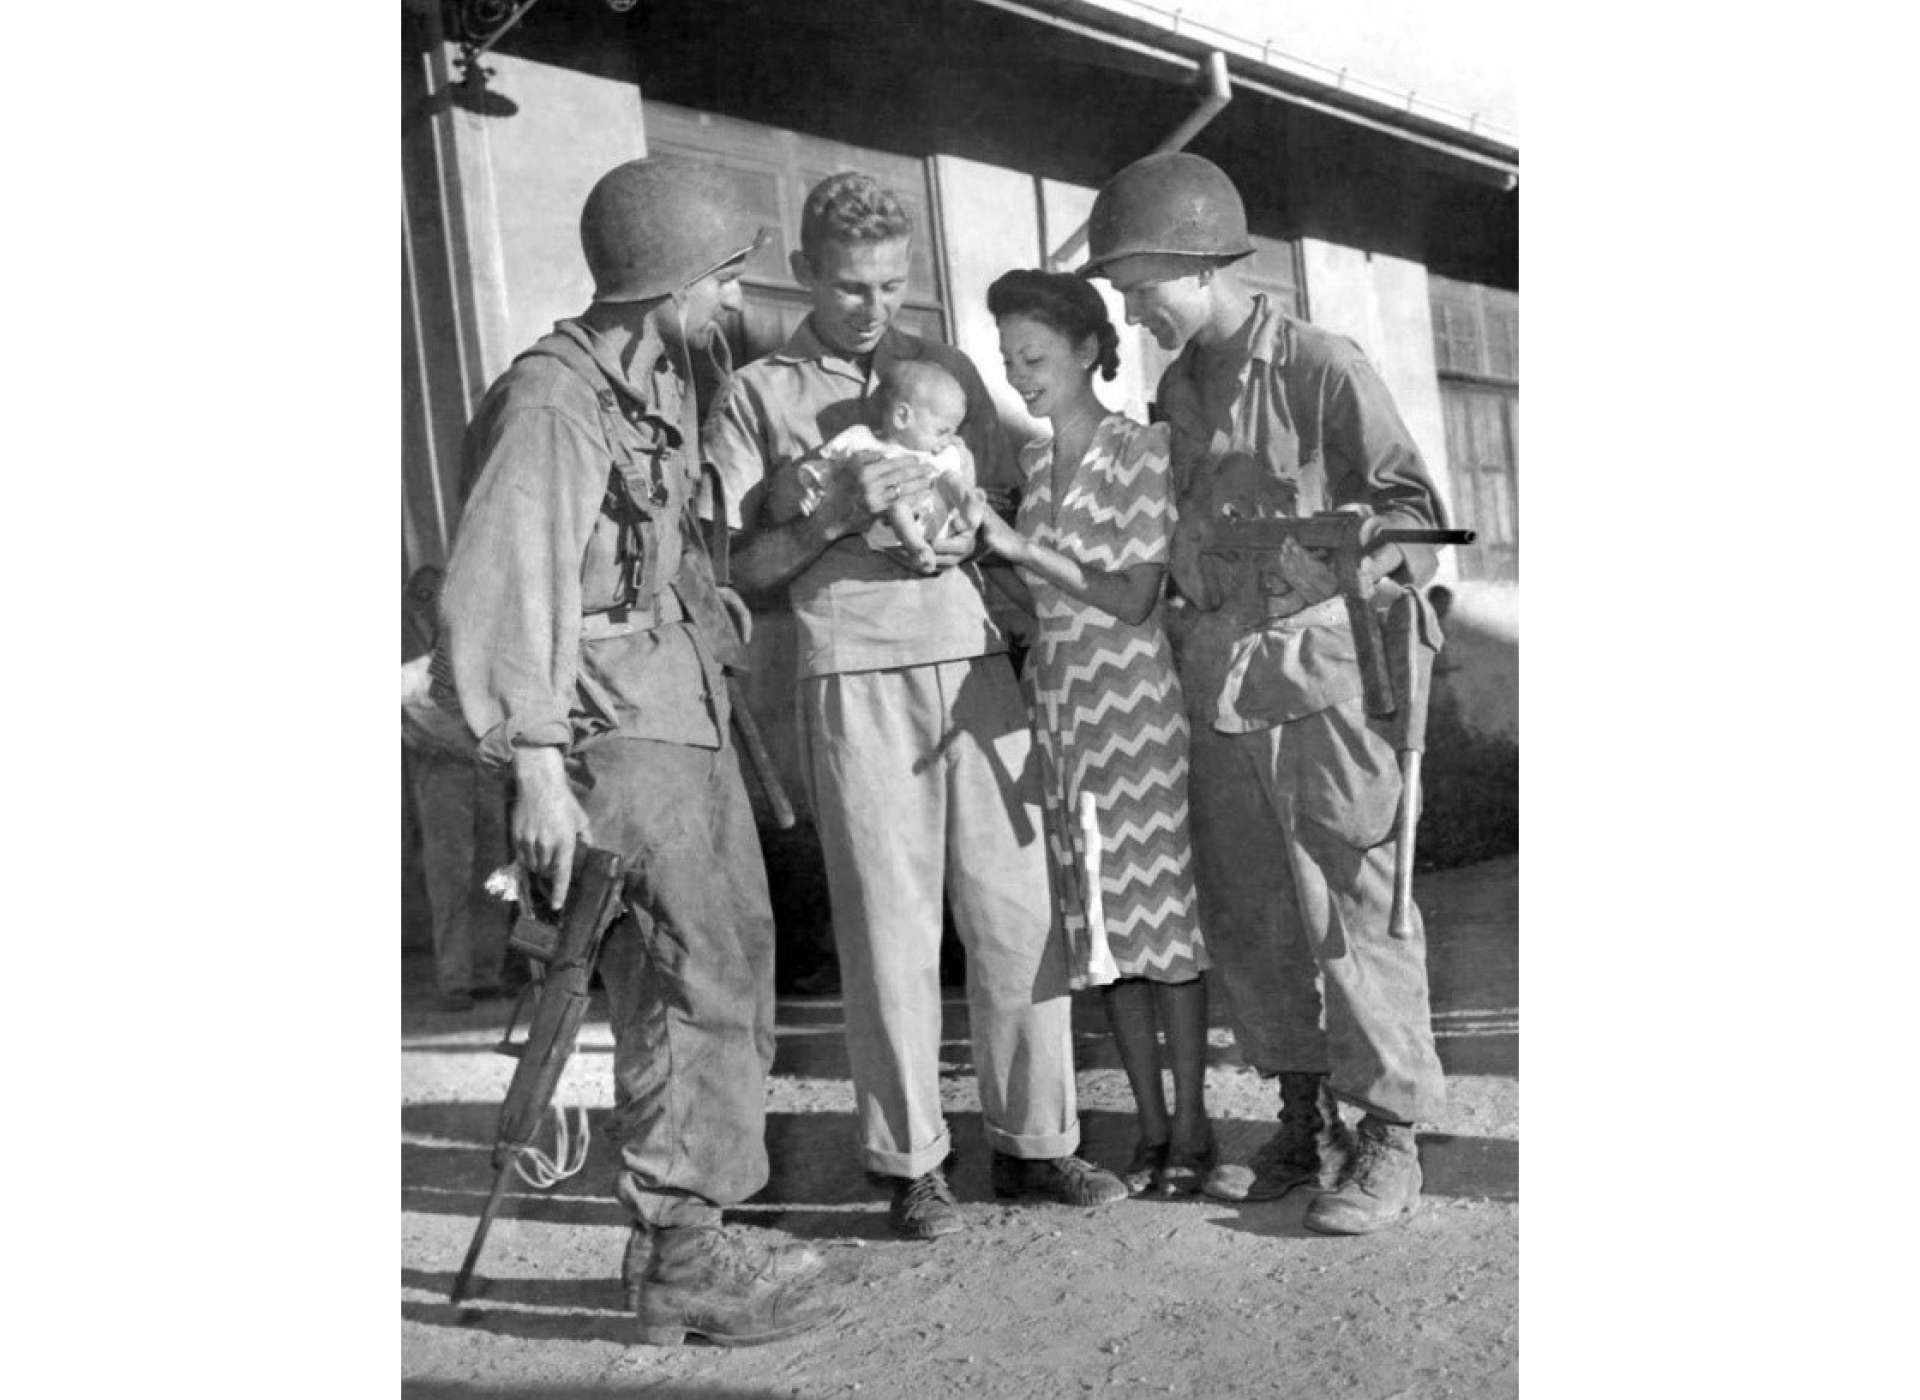 Los Baños internees, Hal Bowie and his wife and baby daughter, with 11th Airborne paratroopers shortly after the raid, 23 February 1945. US Army Signal Corps Photo courtesy of the National Archives.